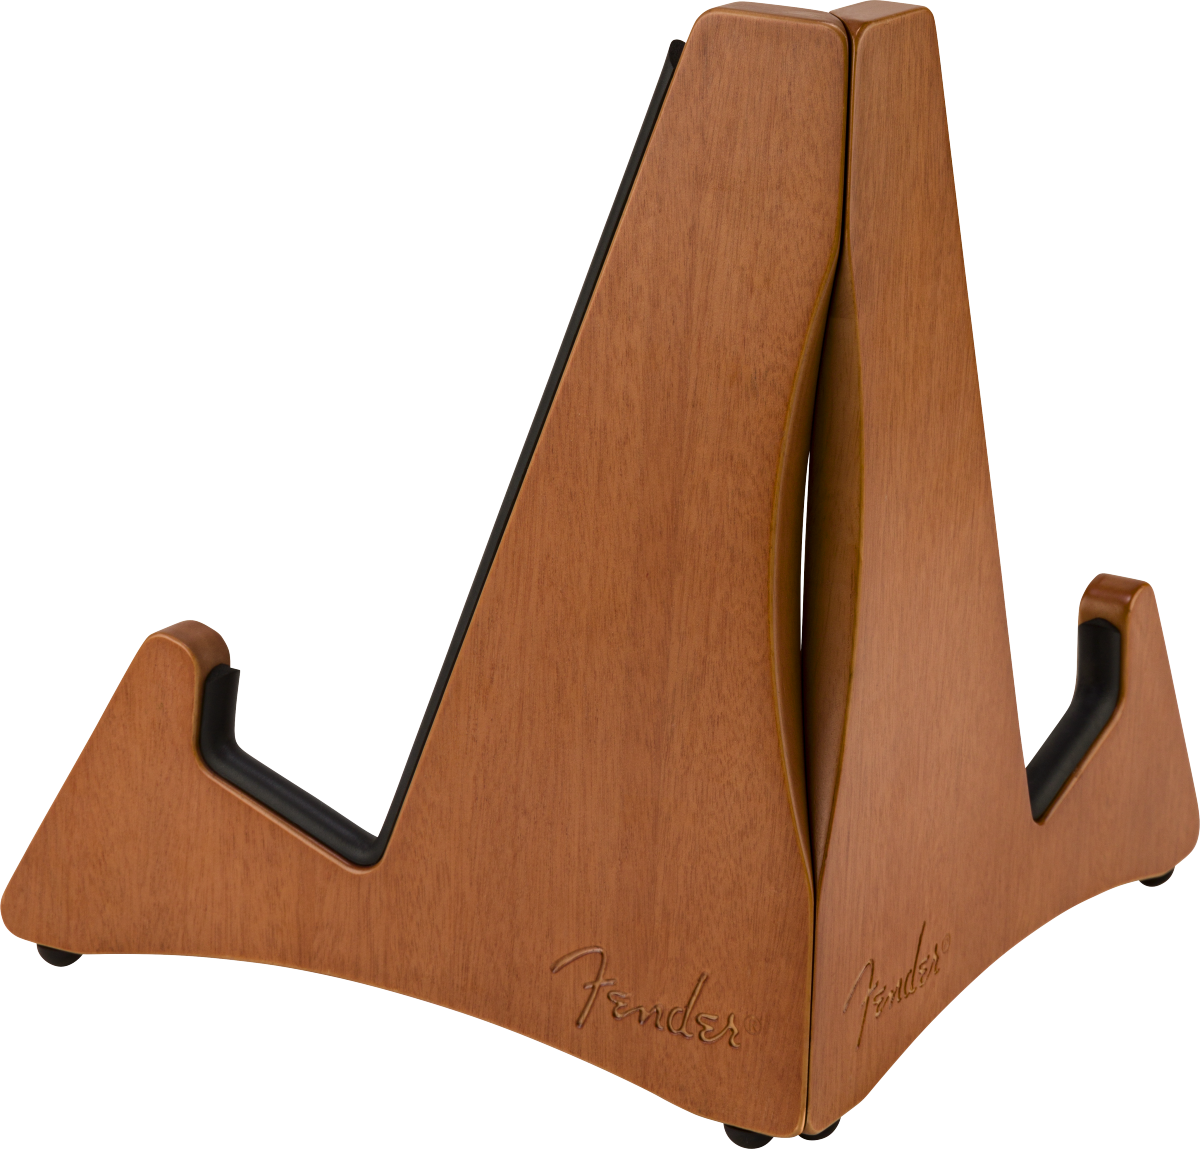 FENDER TIMBERFRAME GUITAR STAND